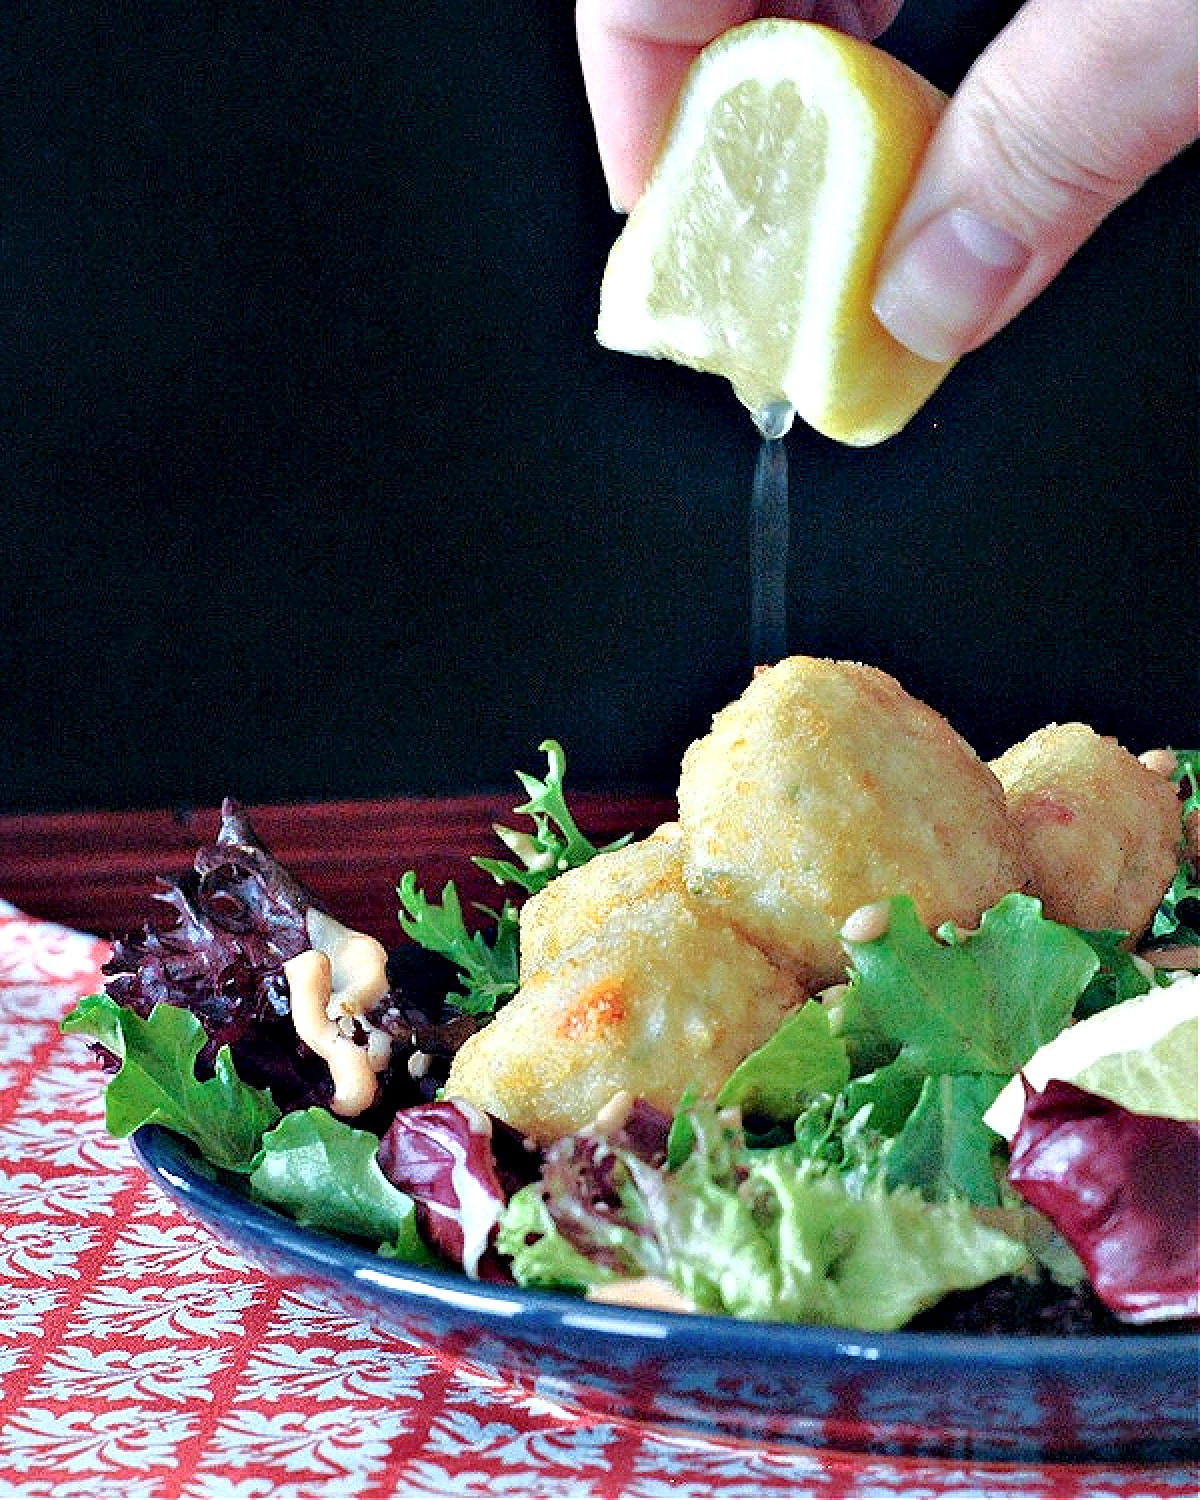 An entree salad of greens, crab cakes, and Thousand Island dressing; a hand squeezing a lemon over the salad.